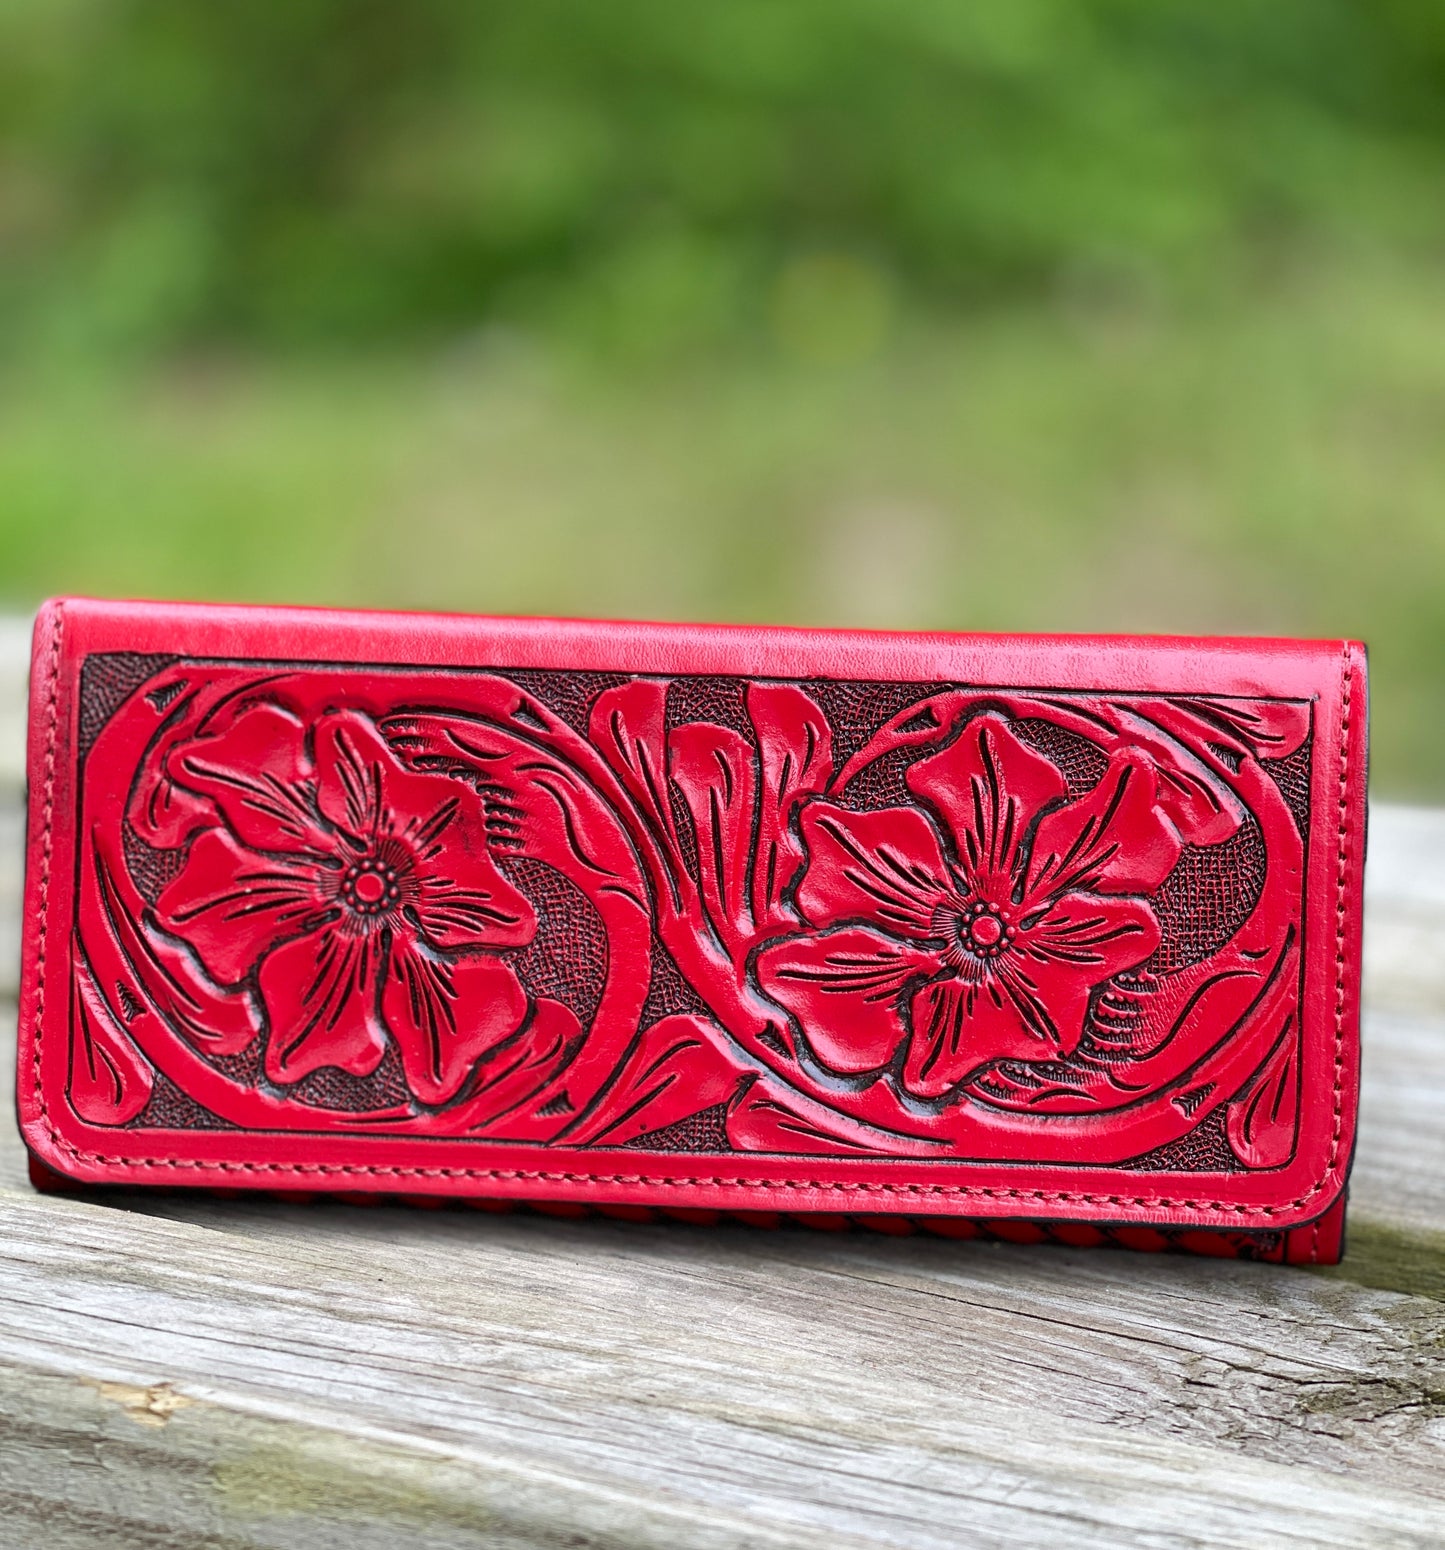 Hand Tooled Leather Wallet, "WALLET" by ALLE - ALLE Handbags